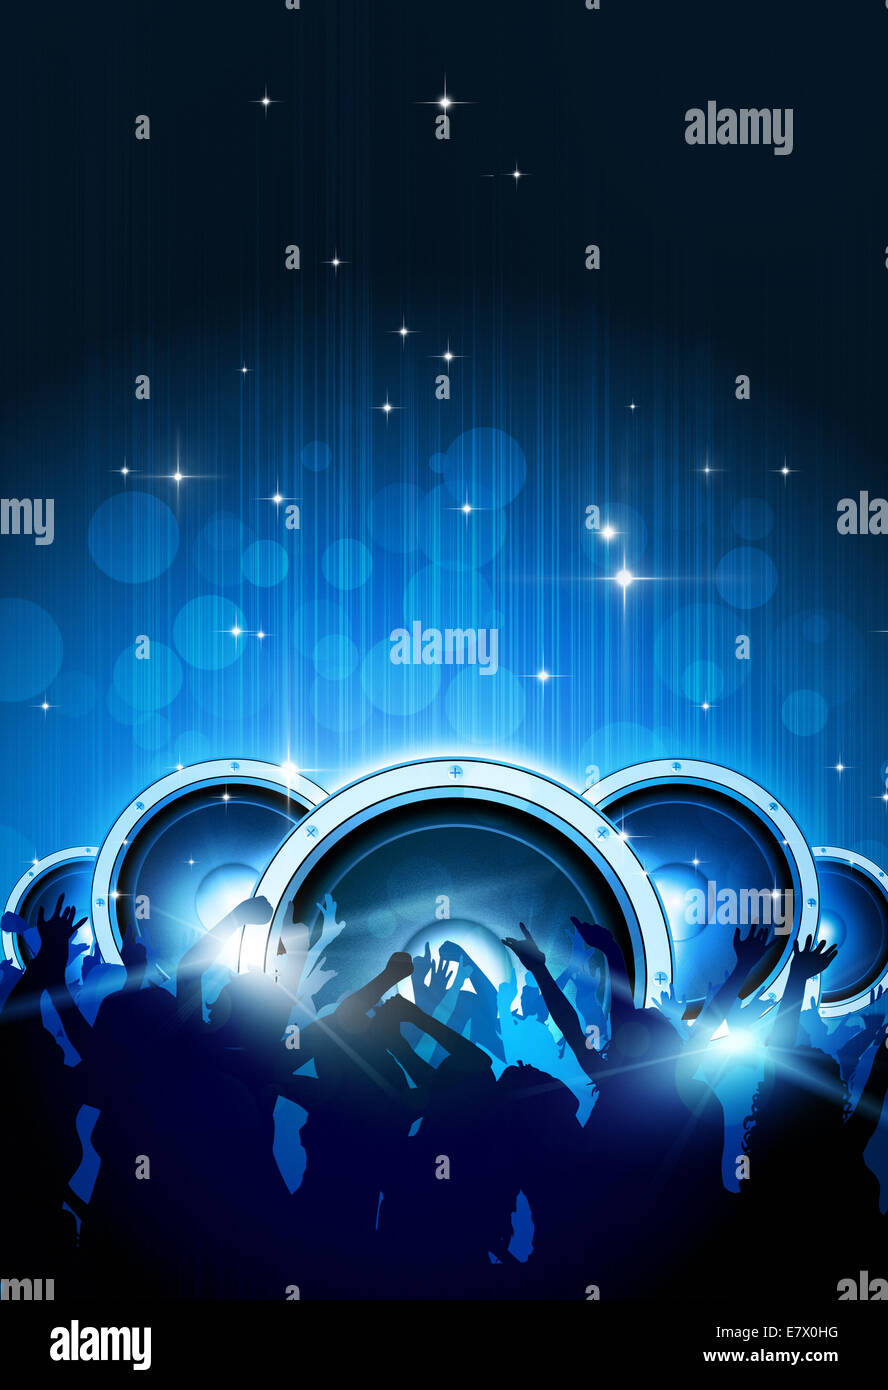 Party Music Background For Flyers And Night Club Posters Stock Photo Alamy